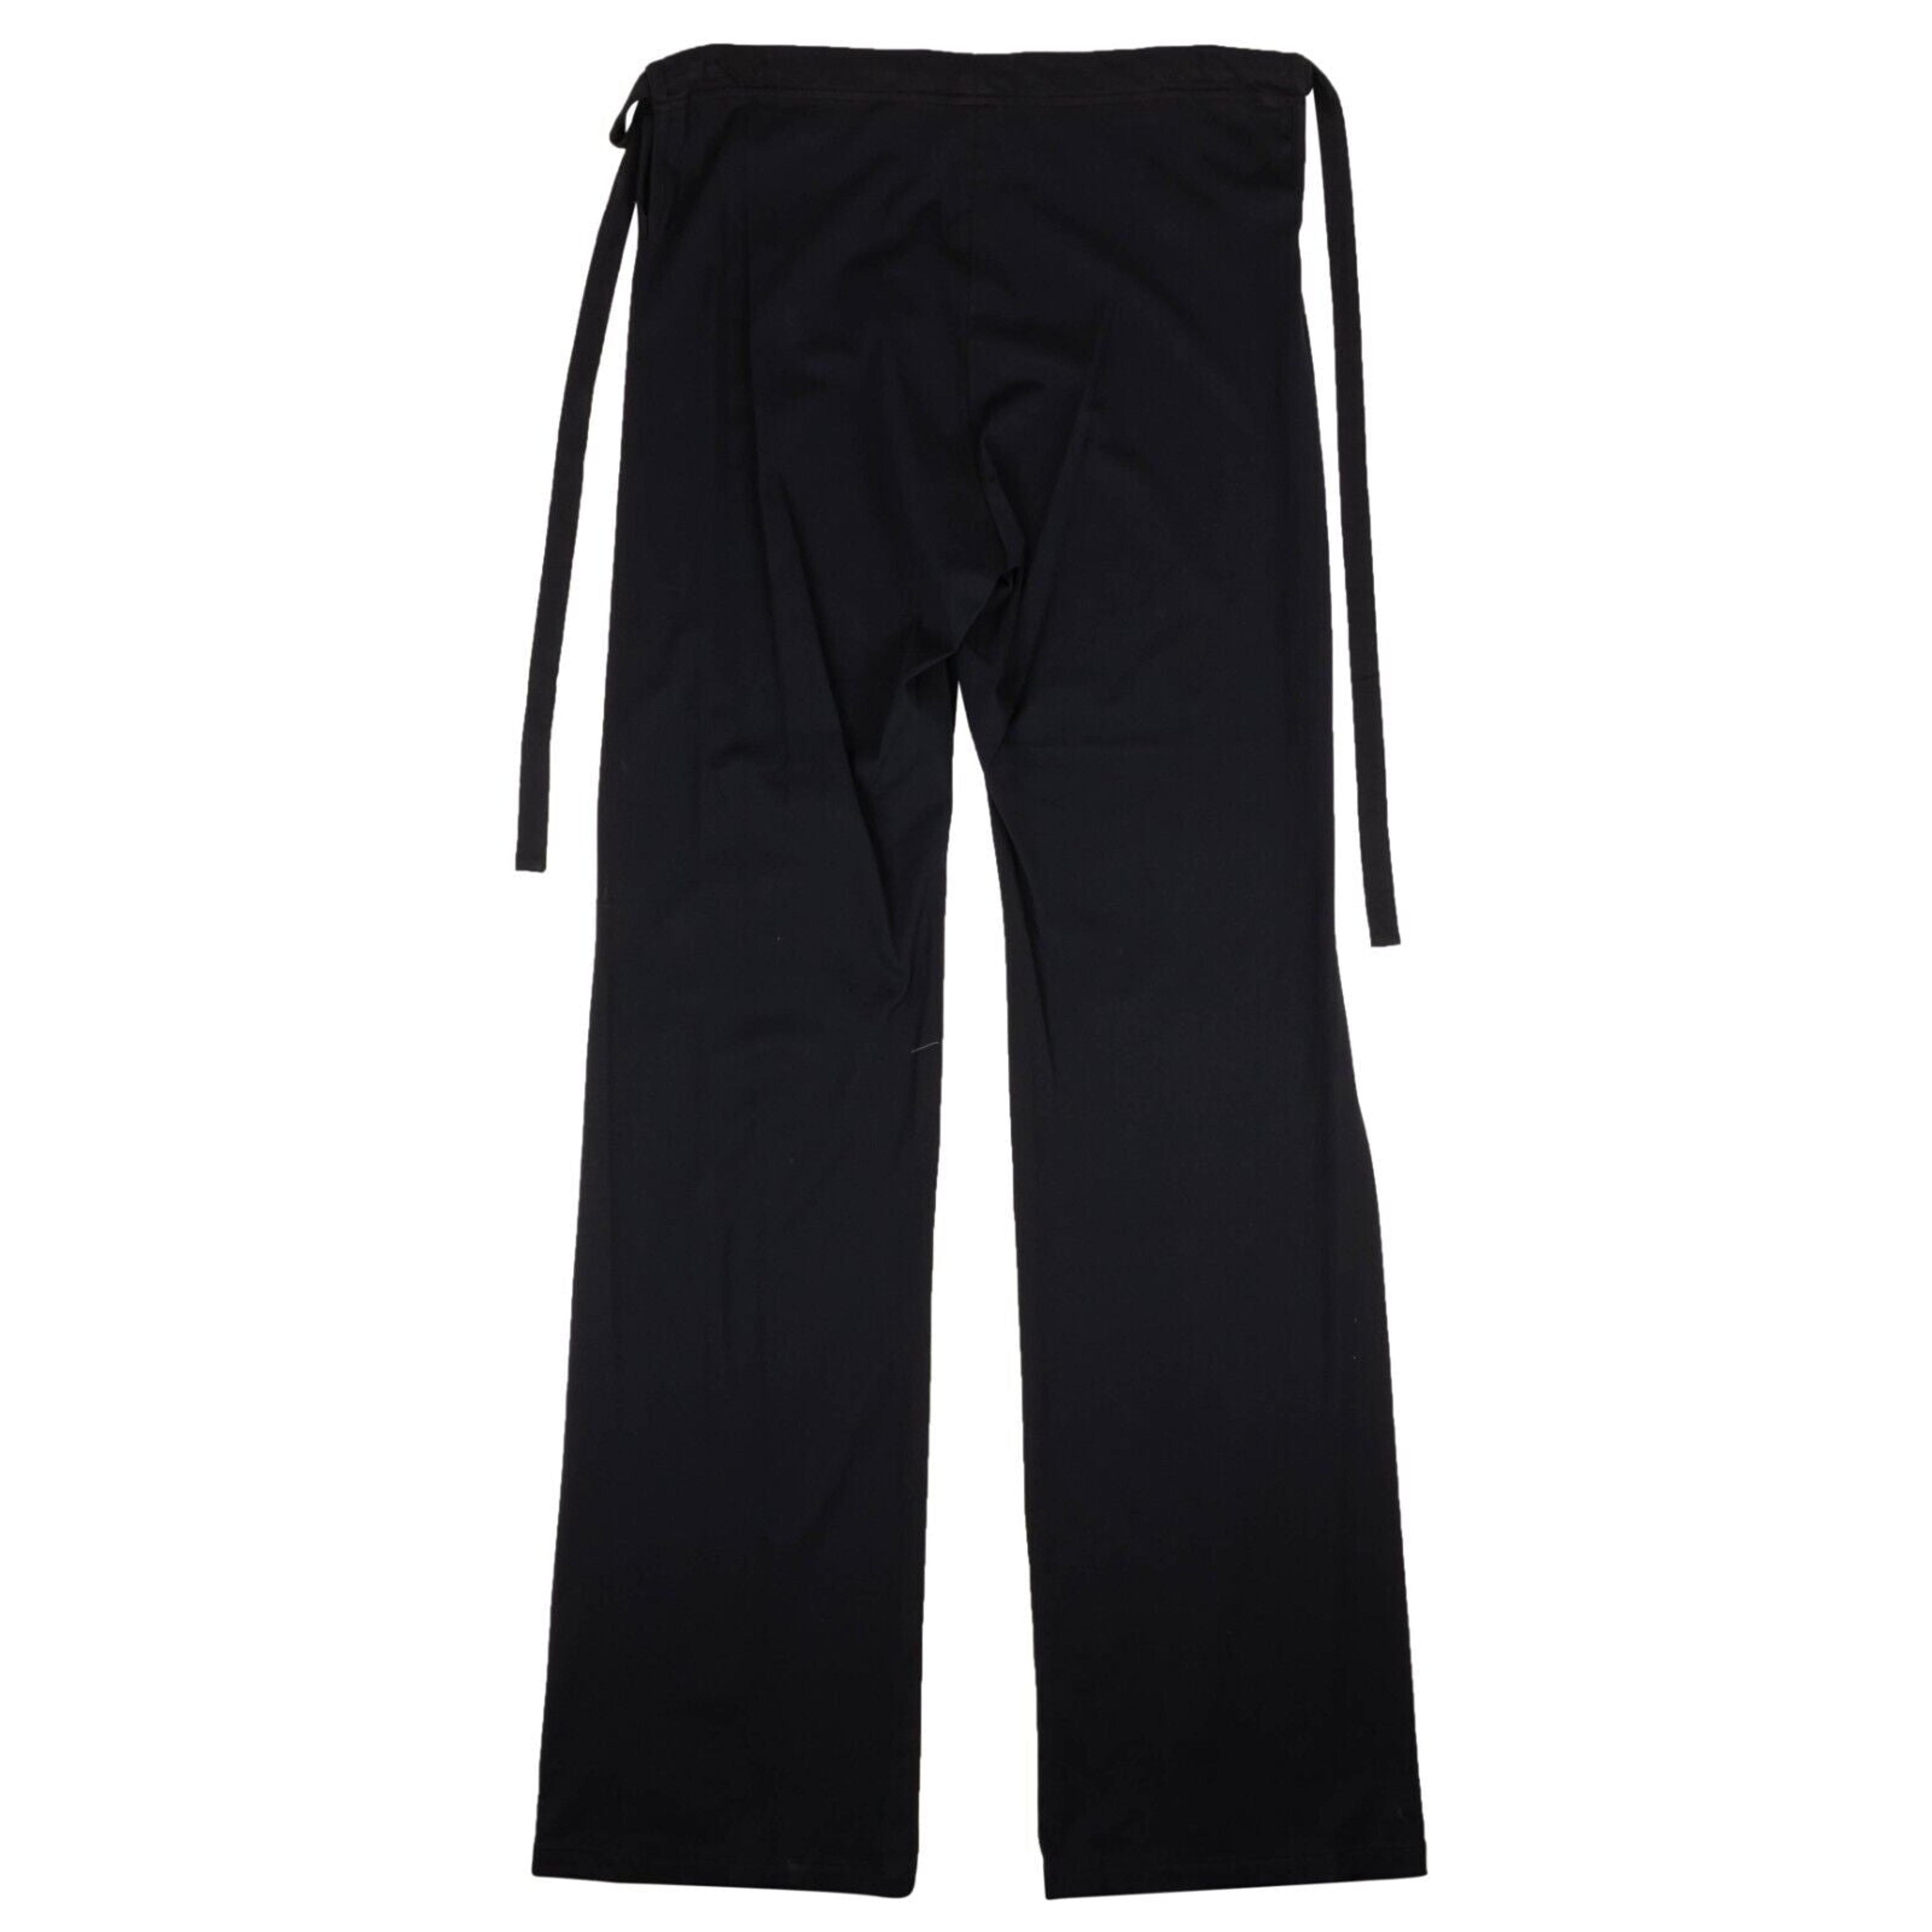 Alternate View 2 of A.P.C Pants - Navy Blue